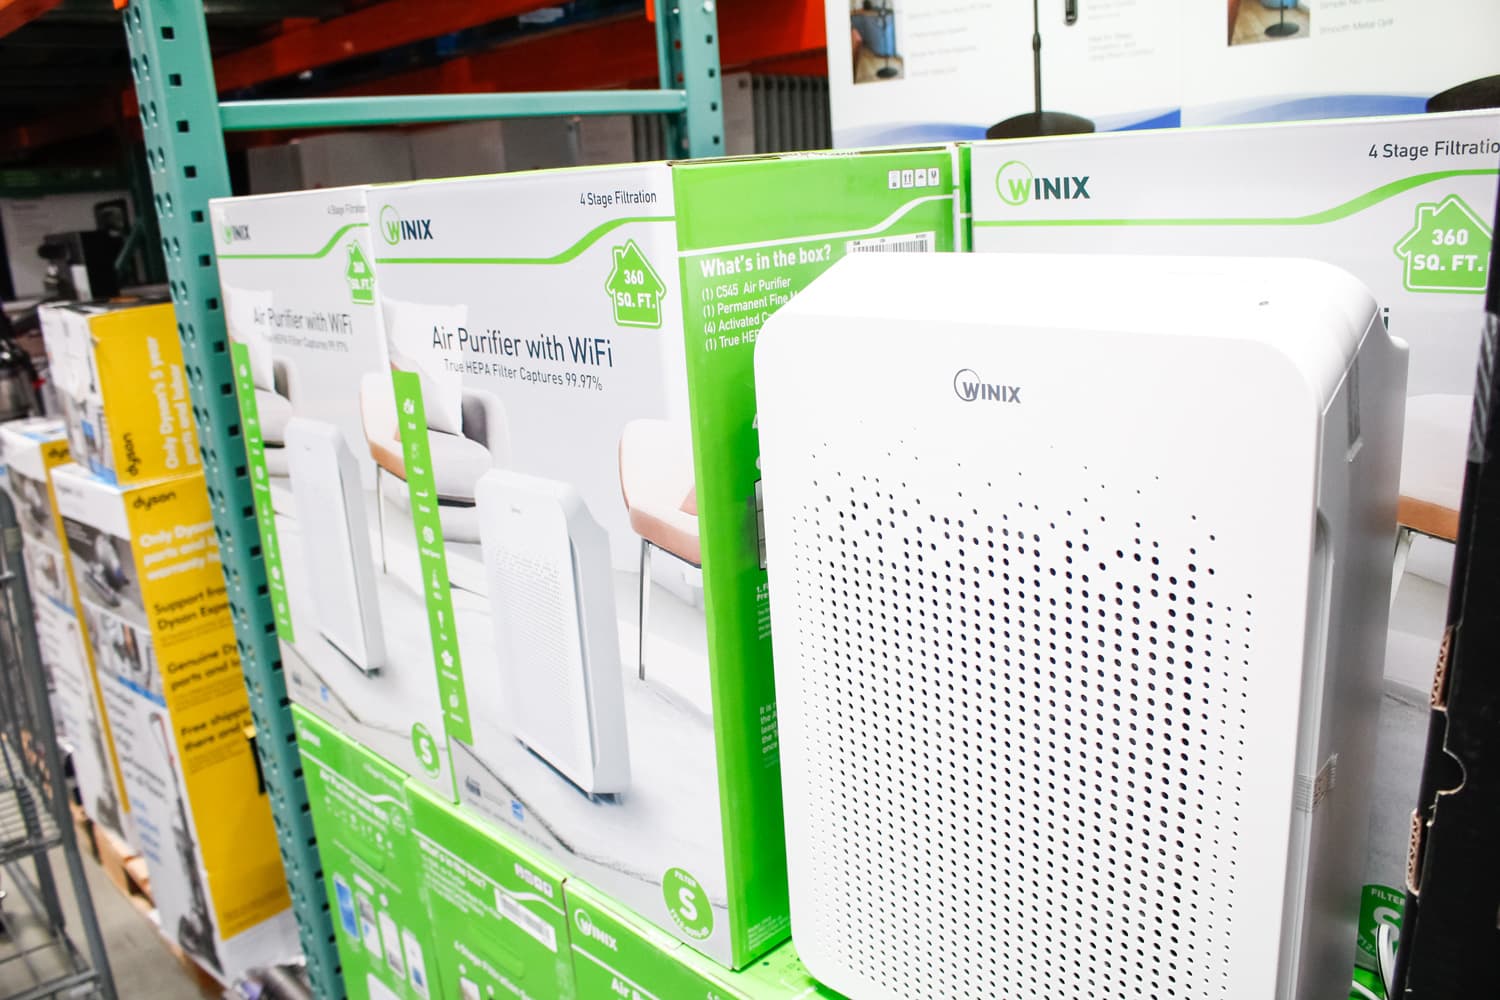 A view of several boxes of Winix air purifier with WiFi, on display at a local big box grocery store.